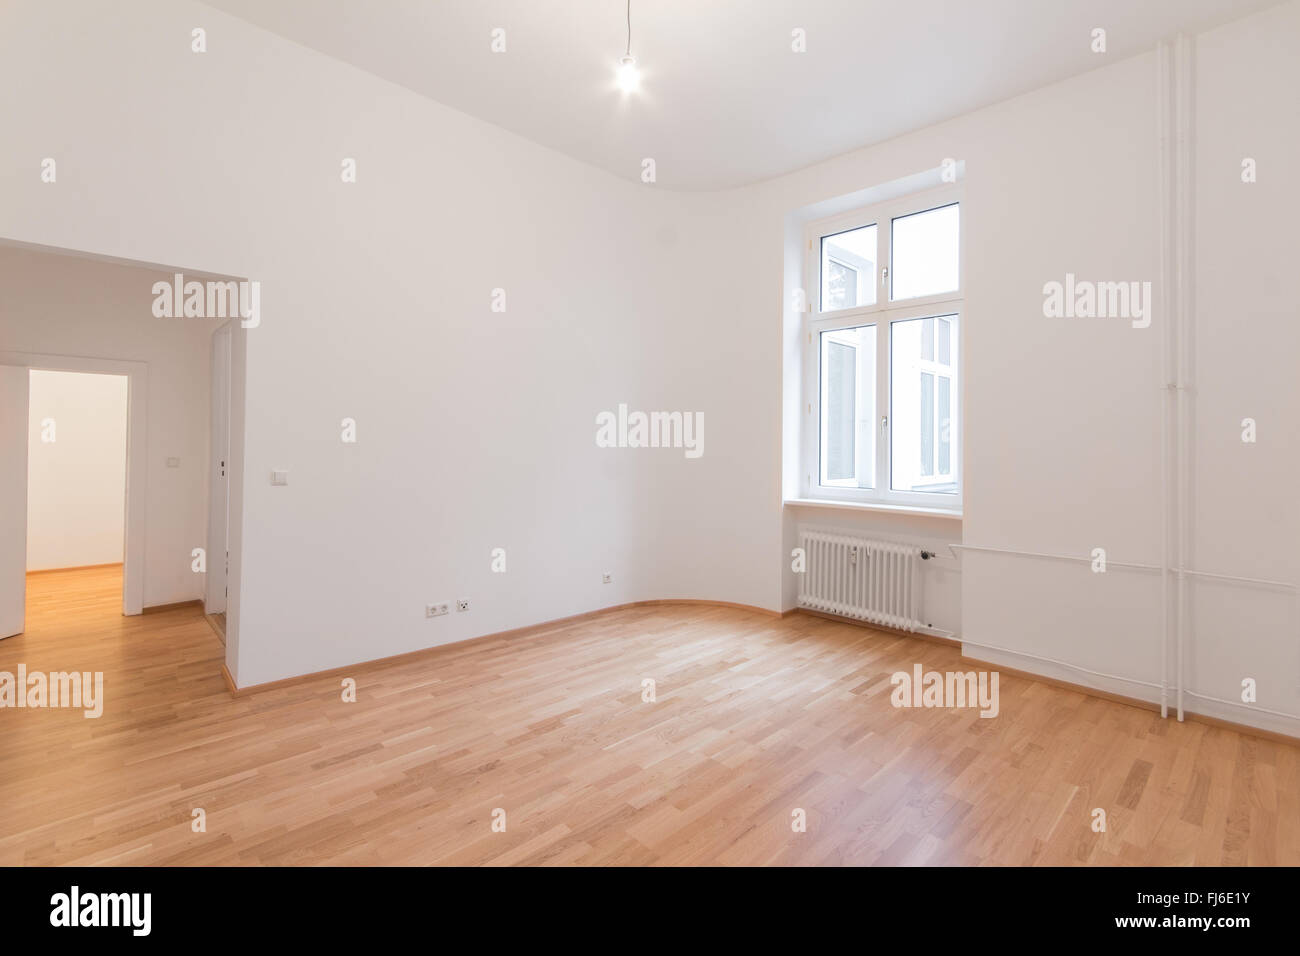 fresh renovated flat - home / apartment - fresh renovated room with wooden oak floor, white walls and window Stock Photo